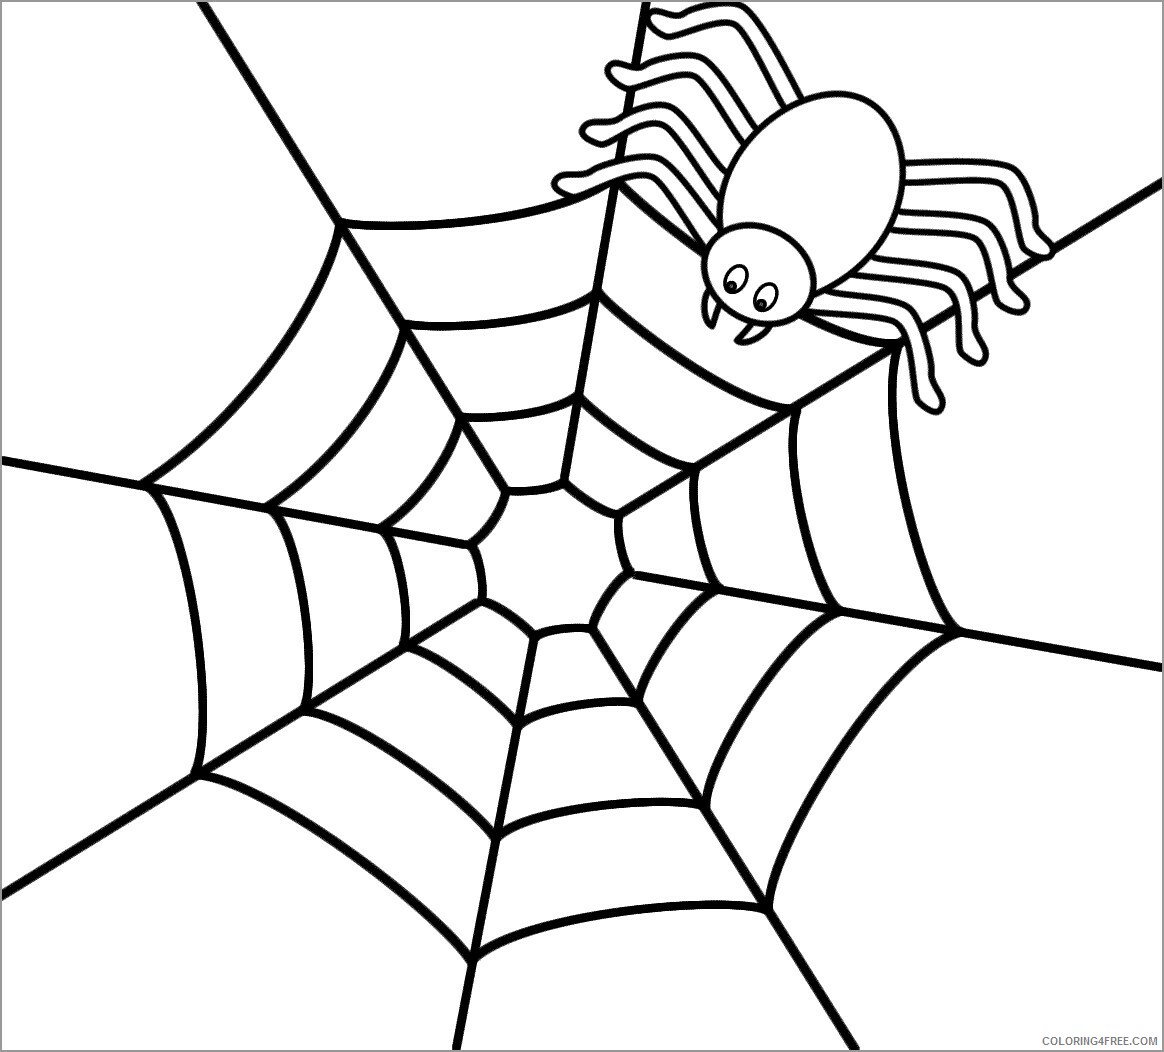 Spider Coloring Pages Animal Printable Sheets cute spider for kids 2021 4618 Coloring4free